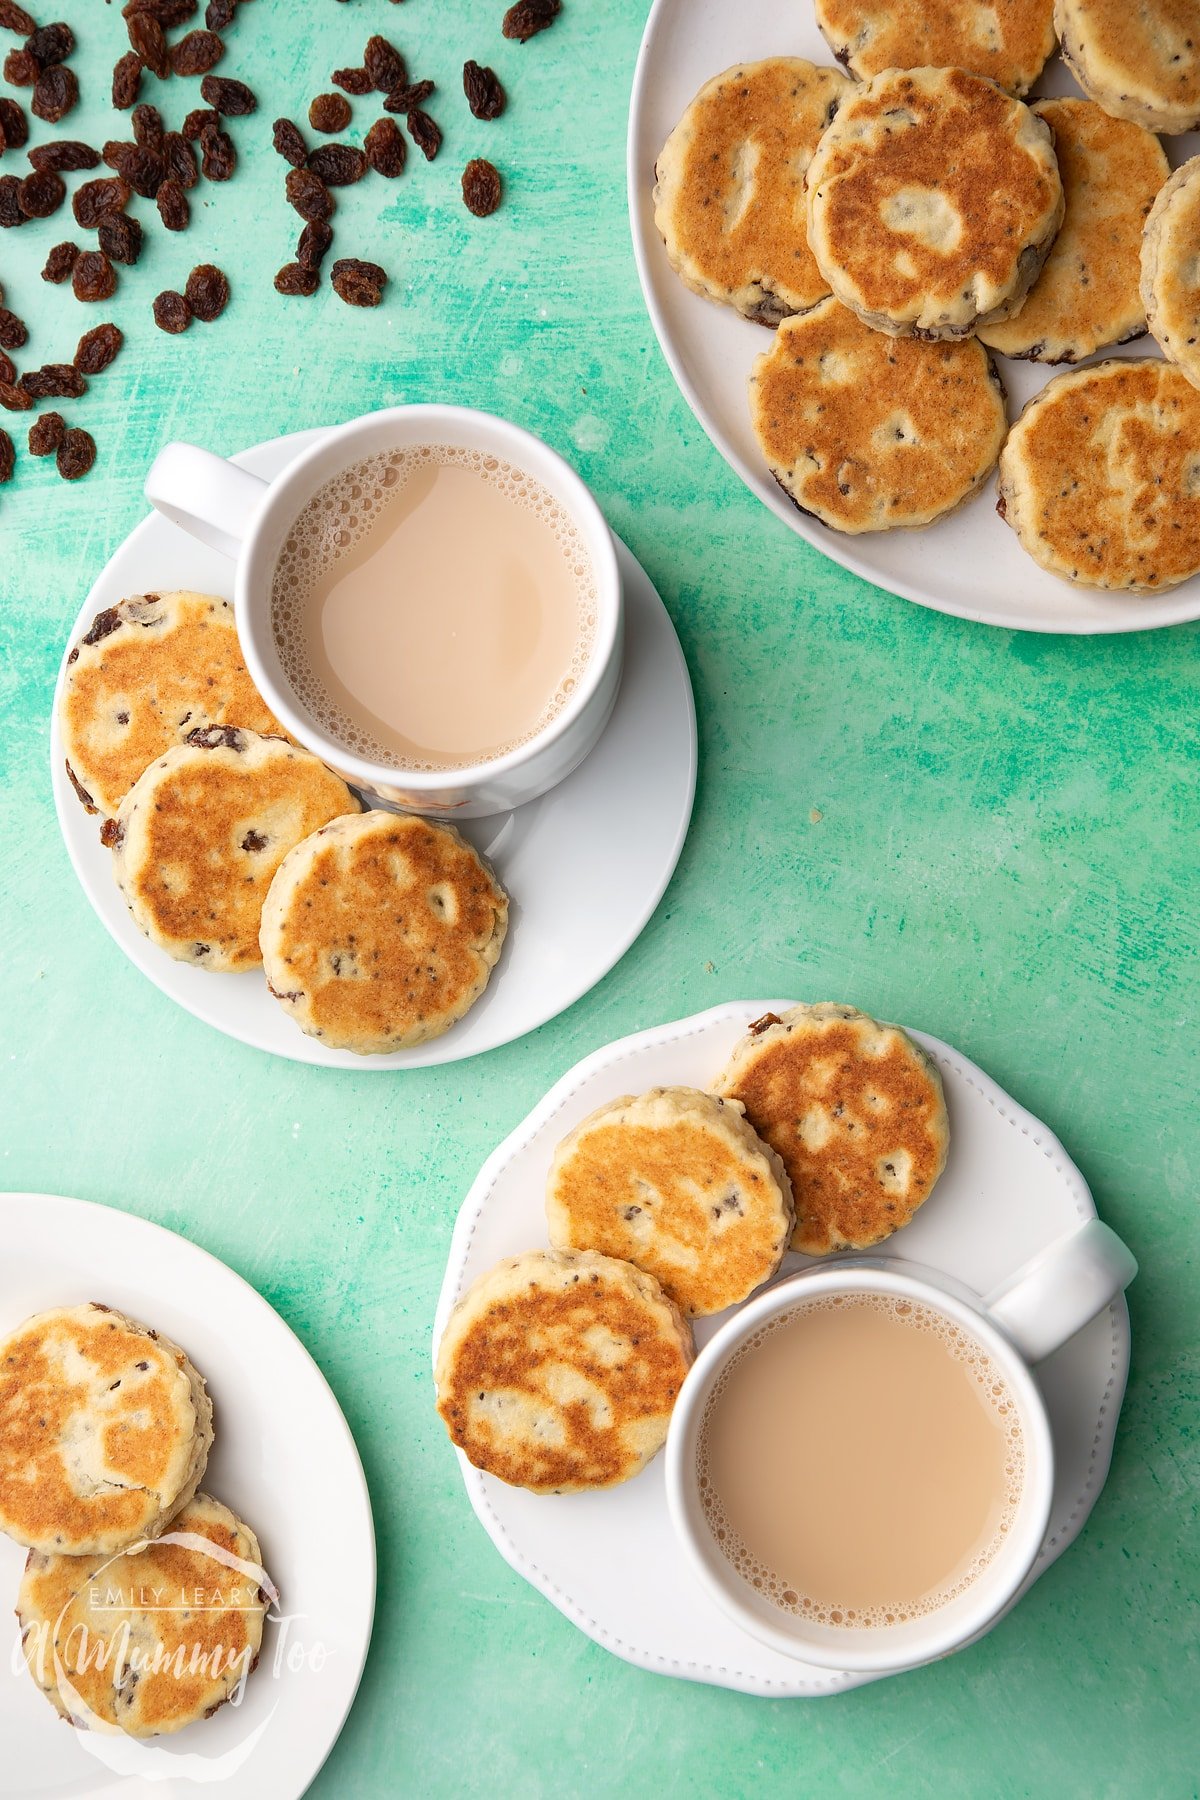 Vegan Welsh cakes arranged on a white plate with cups of tea.